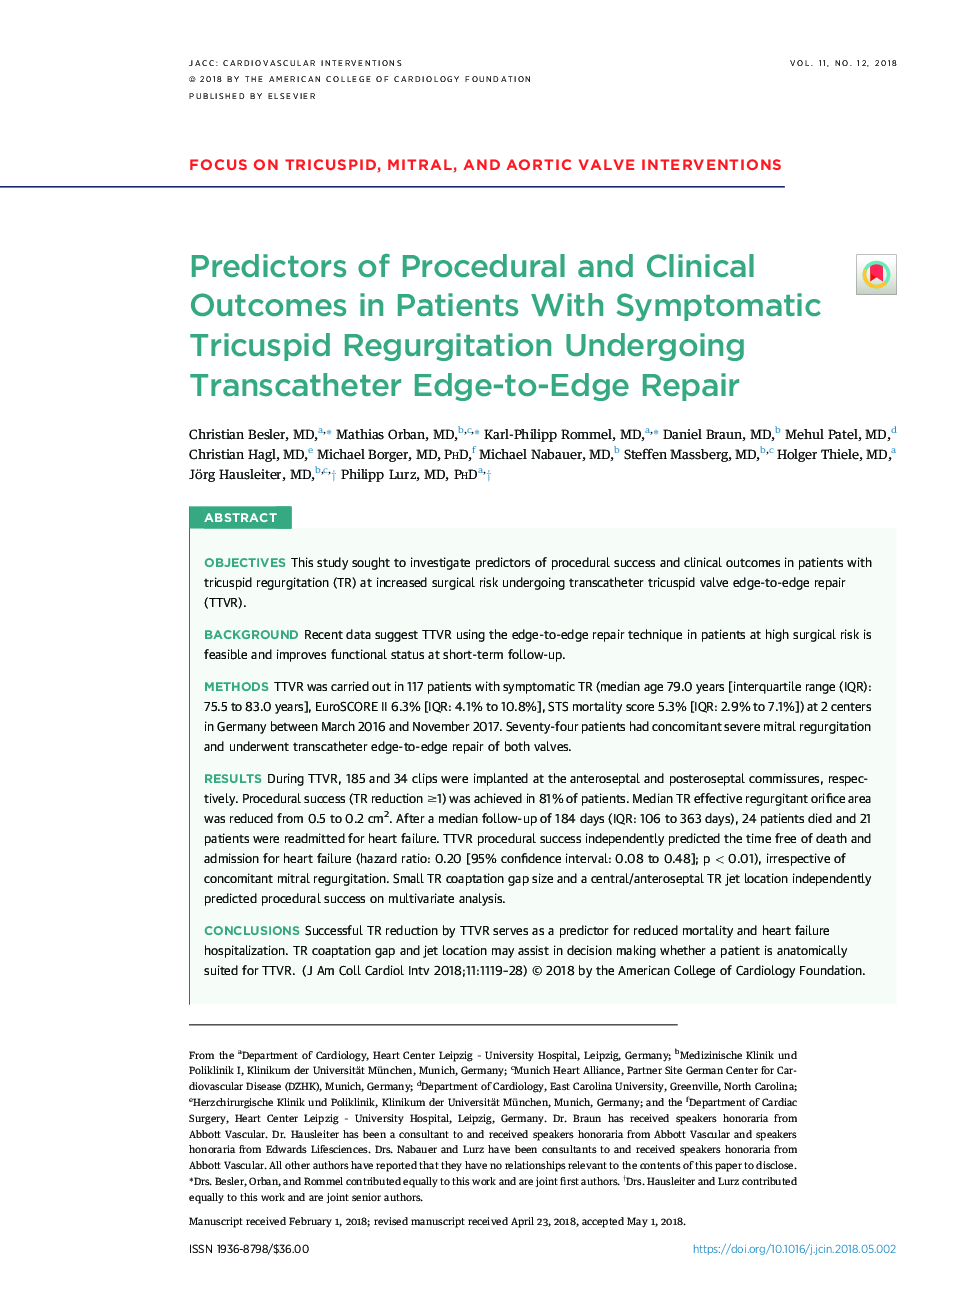 Predictors of Procedural and Clinical Outcomes in Patients With Symptomatic Tricuspid Regurgitation Undergoing Transcatheter Edge-to-Edge Repair